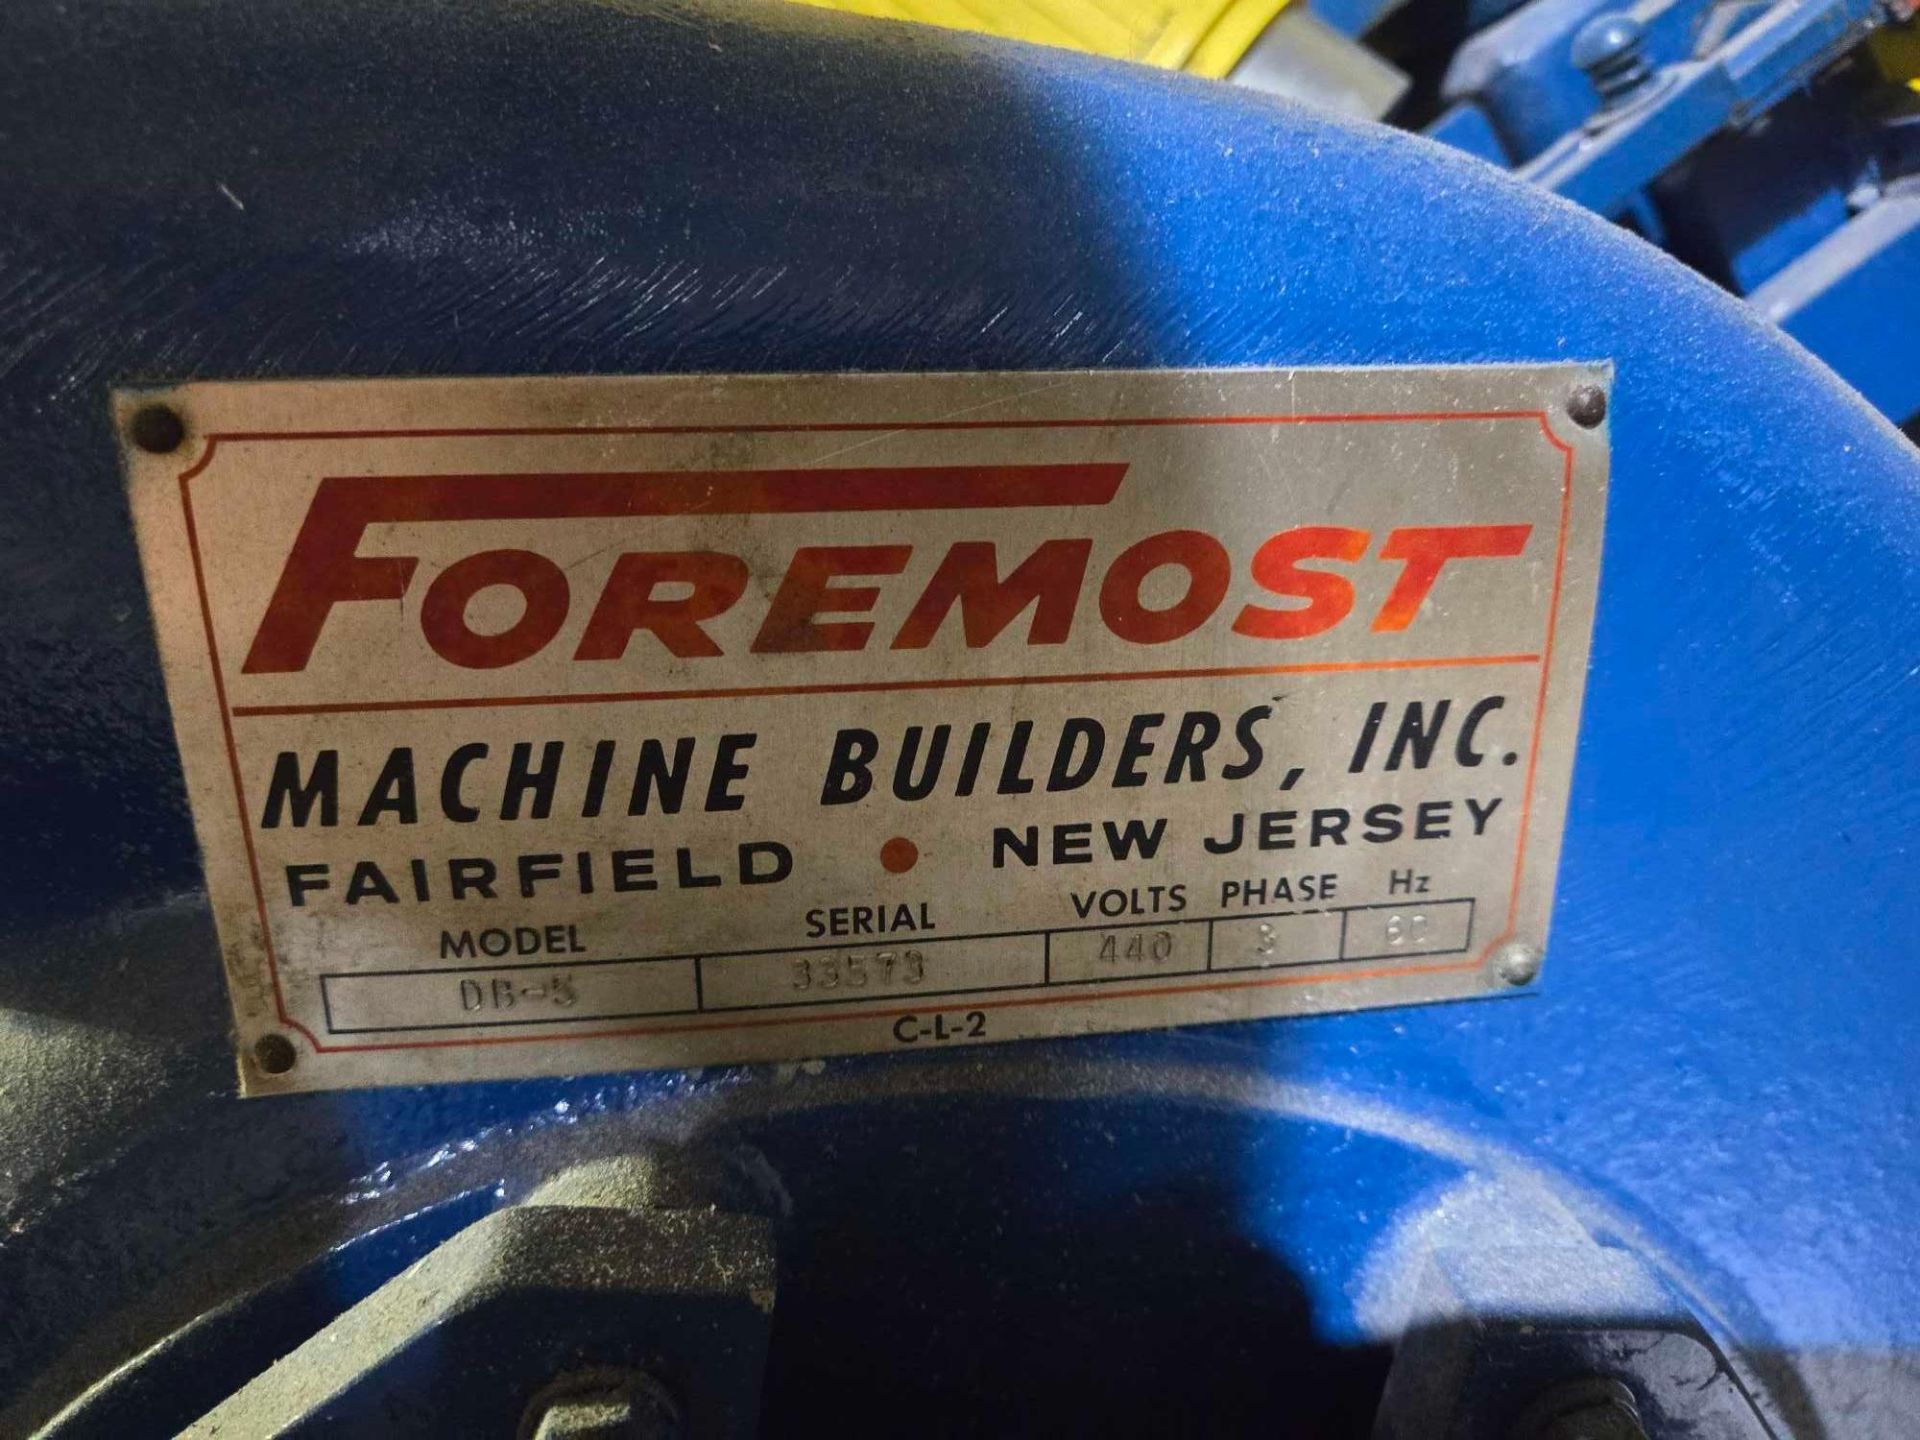 FOREMOST MODEL SCG-1116 ROLL FEED GRINDER, 1990 - Image 7 of 9